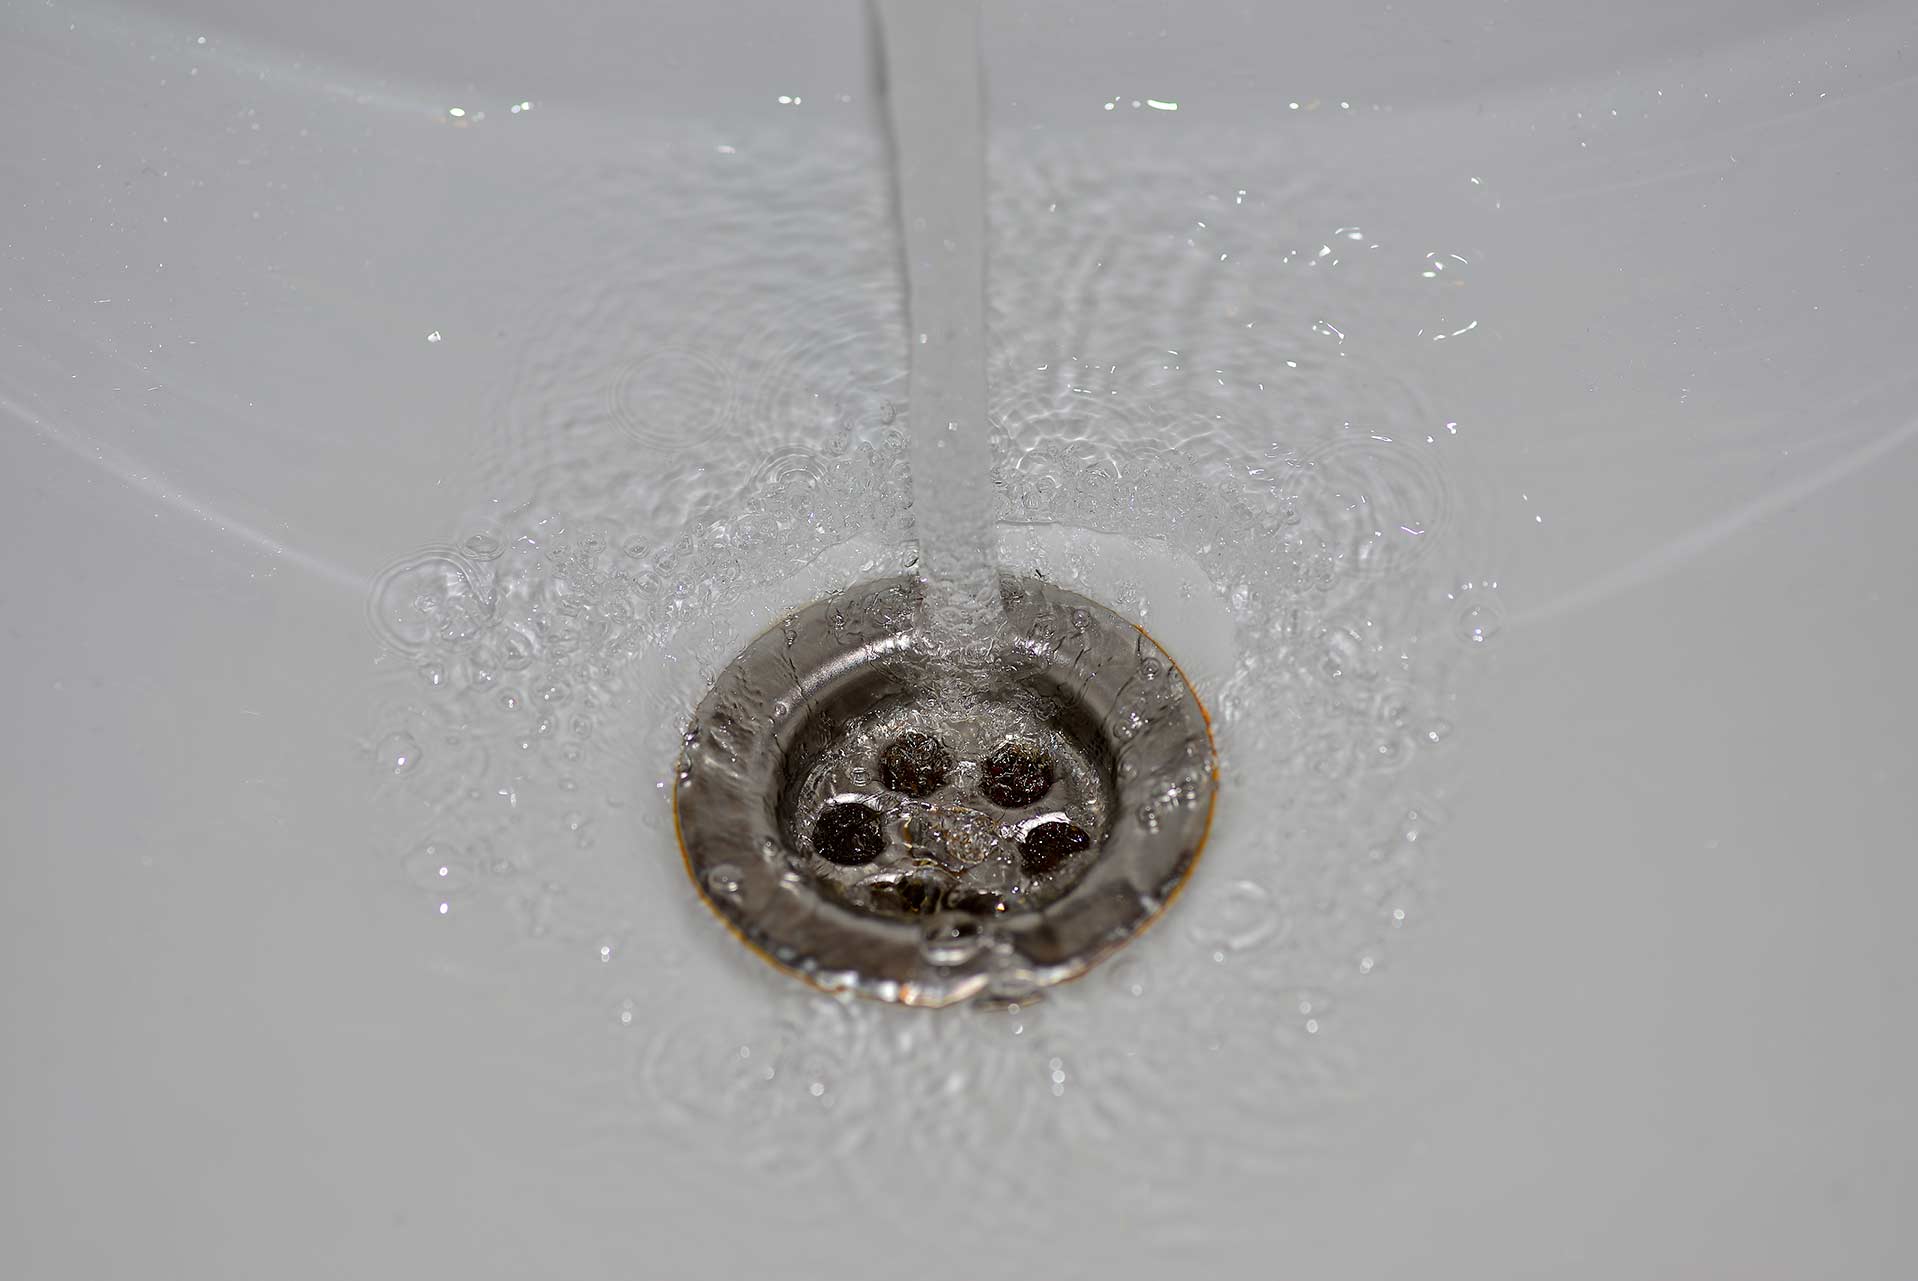 A2B Drains provides services to unblock blocked sinks and drains for properties in Leamington Spa.